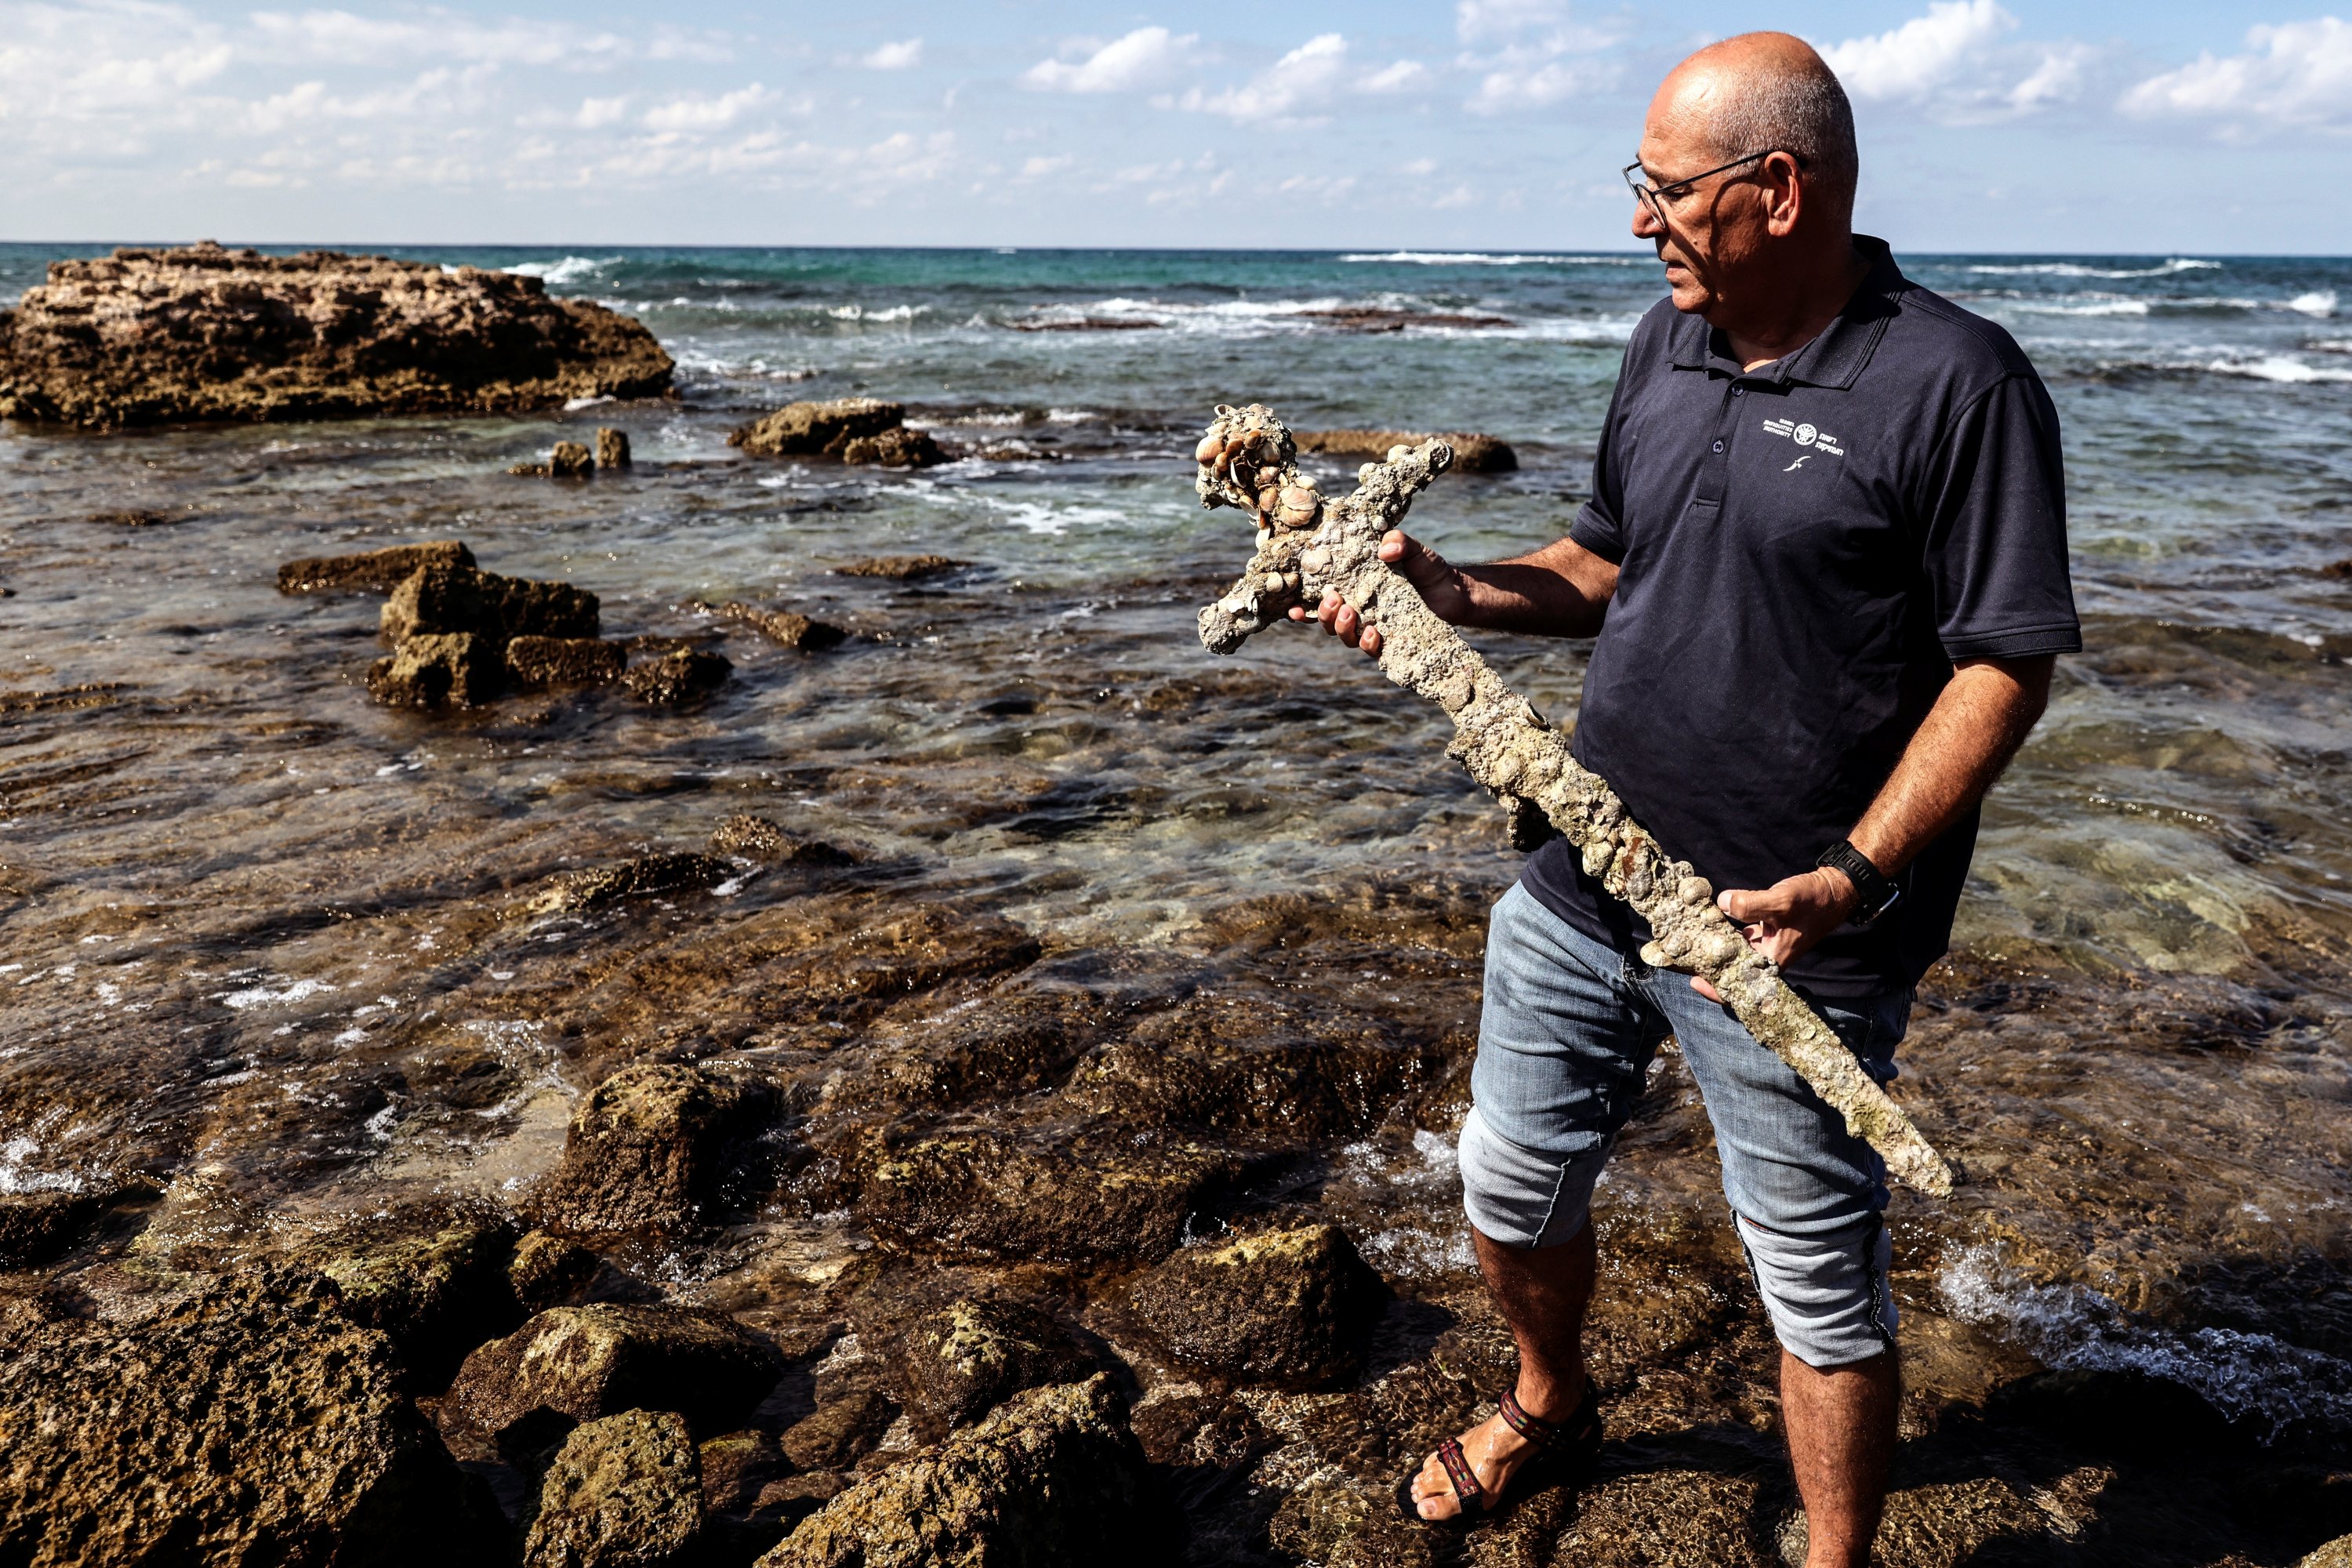 Yaakov Sharvit of the Israel Antiquities Authority holds the sword believed to have belonged to a Crusader, Caesarea, Israel, Oct. 18, 2021. (REUTERS Photo)